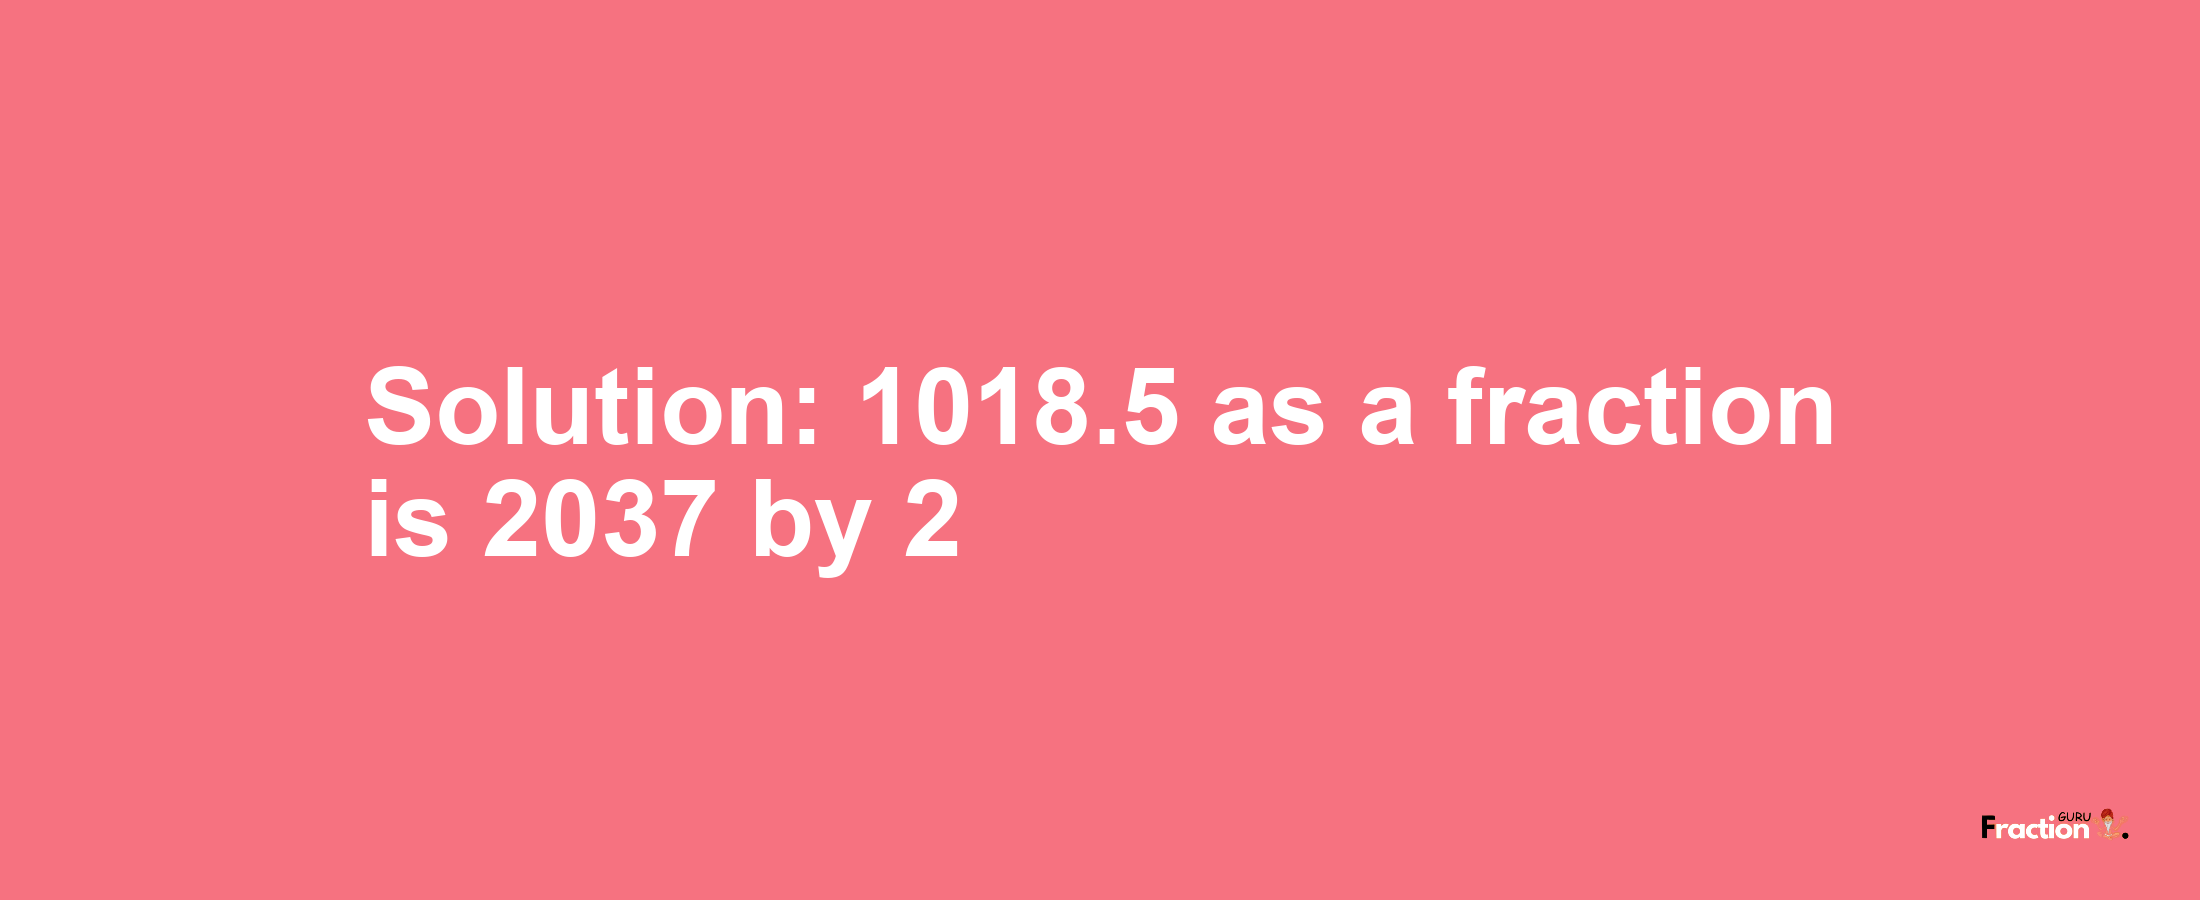 Solution:1018.5 as a fraction is 2037/2